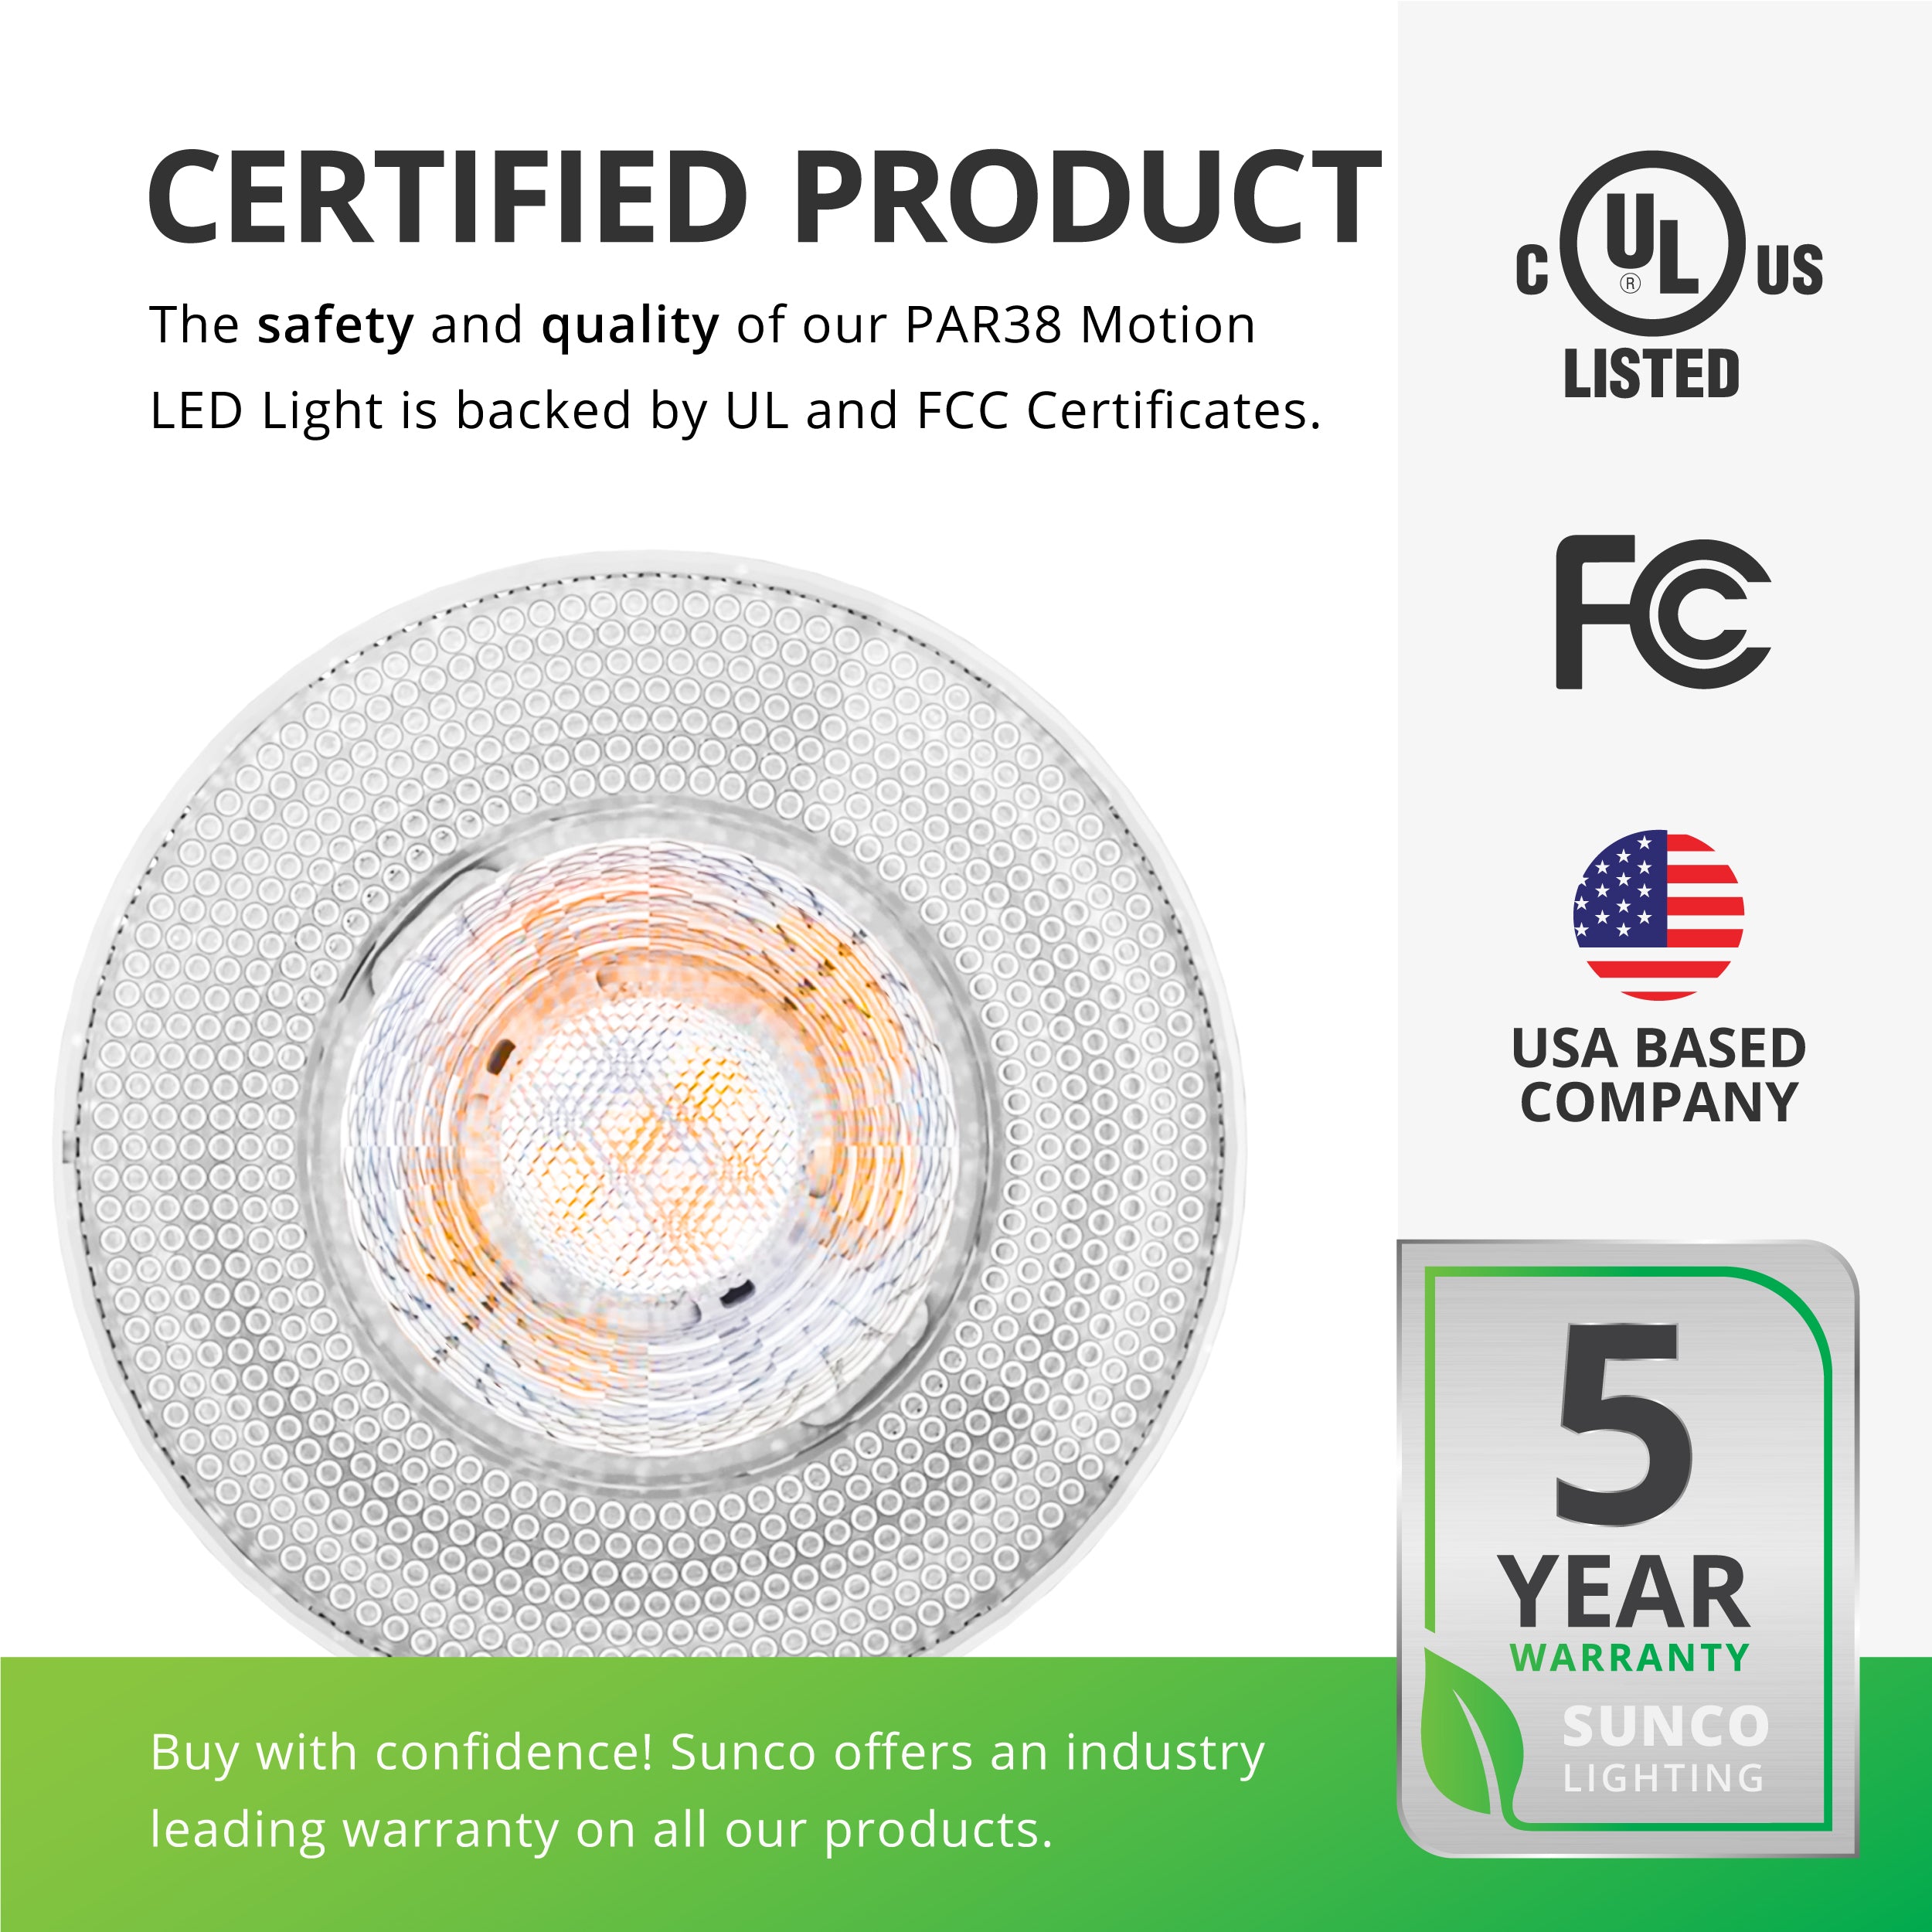 This is a certified product. The safety and quality of our PAR38 Motion LED light bulb is backed by UL listing and FCC certificates so you can buy with confidence. Sunco offers an industry leading warranty on all our products. This PAR8 LED Bulb with Motion Activation has a 5-year warranty. Sunco is American owned and operated. We are based in the USA.